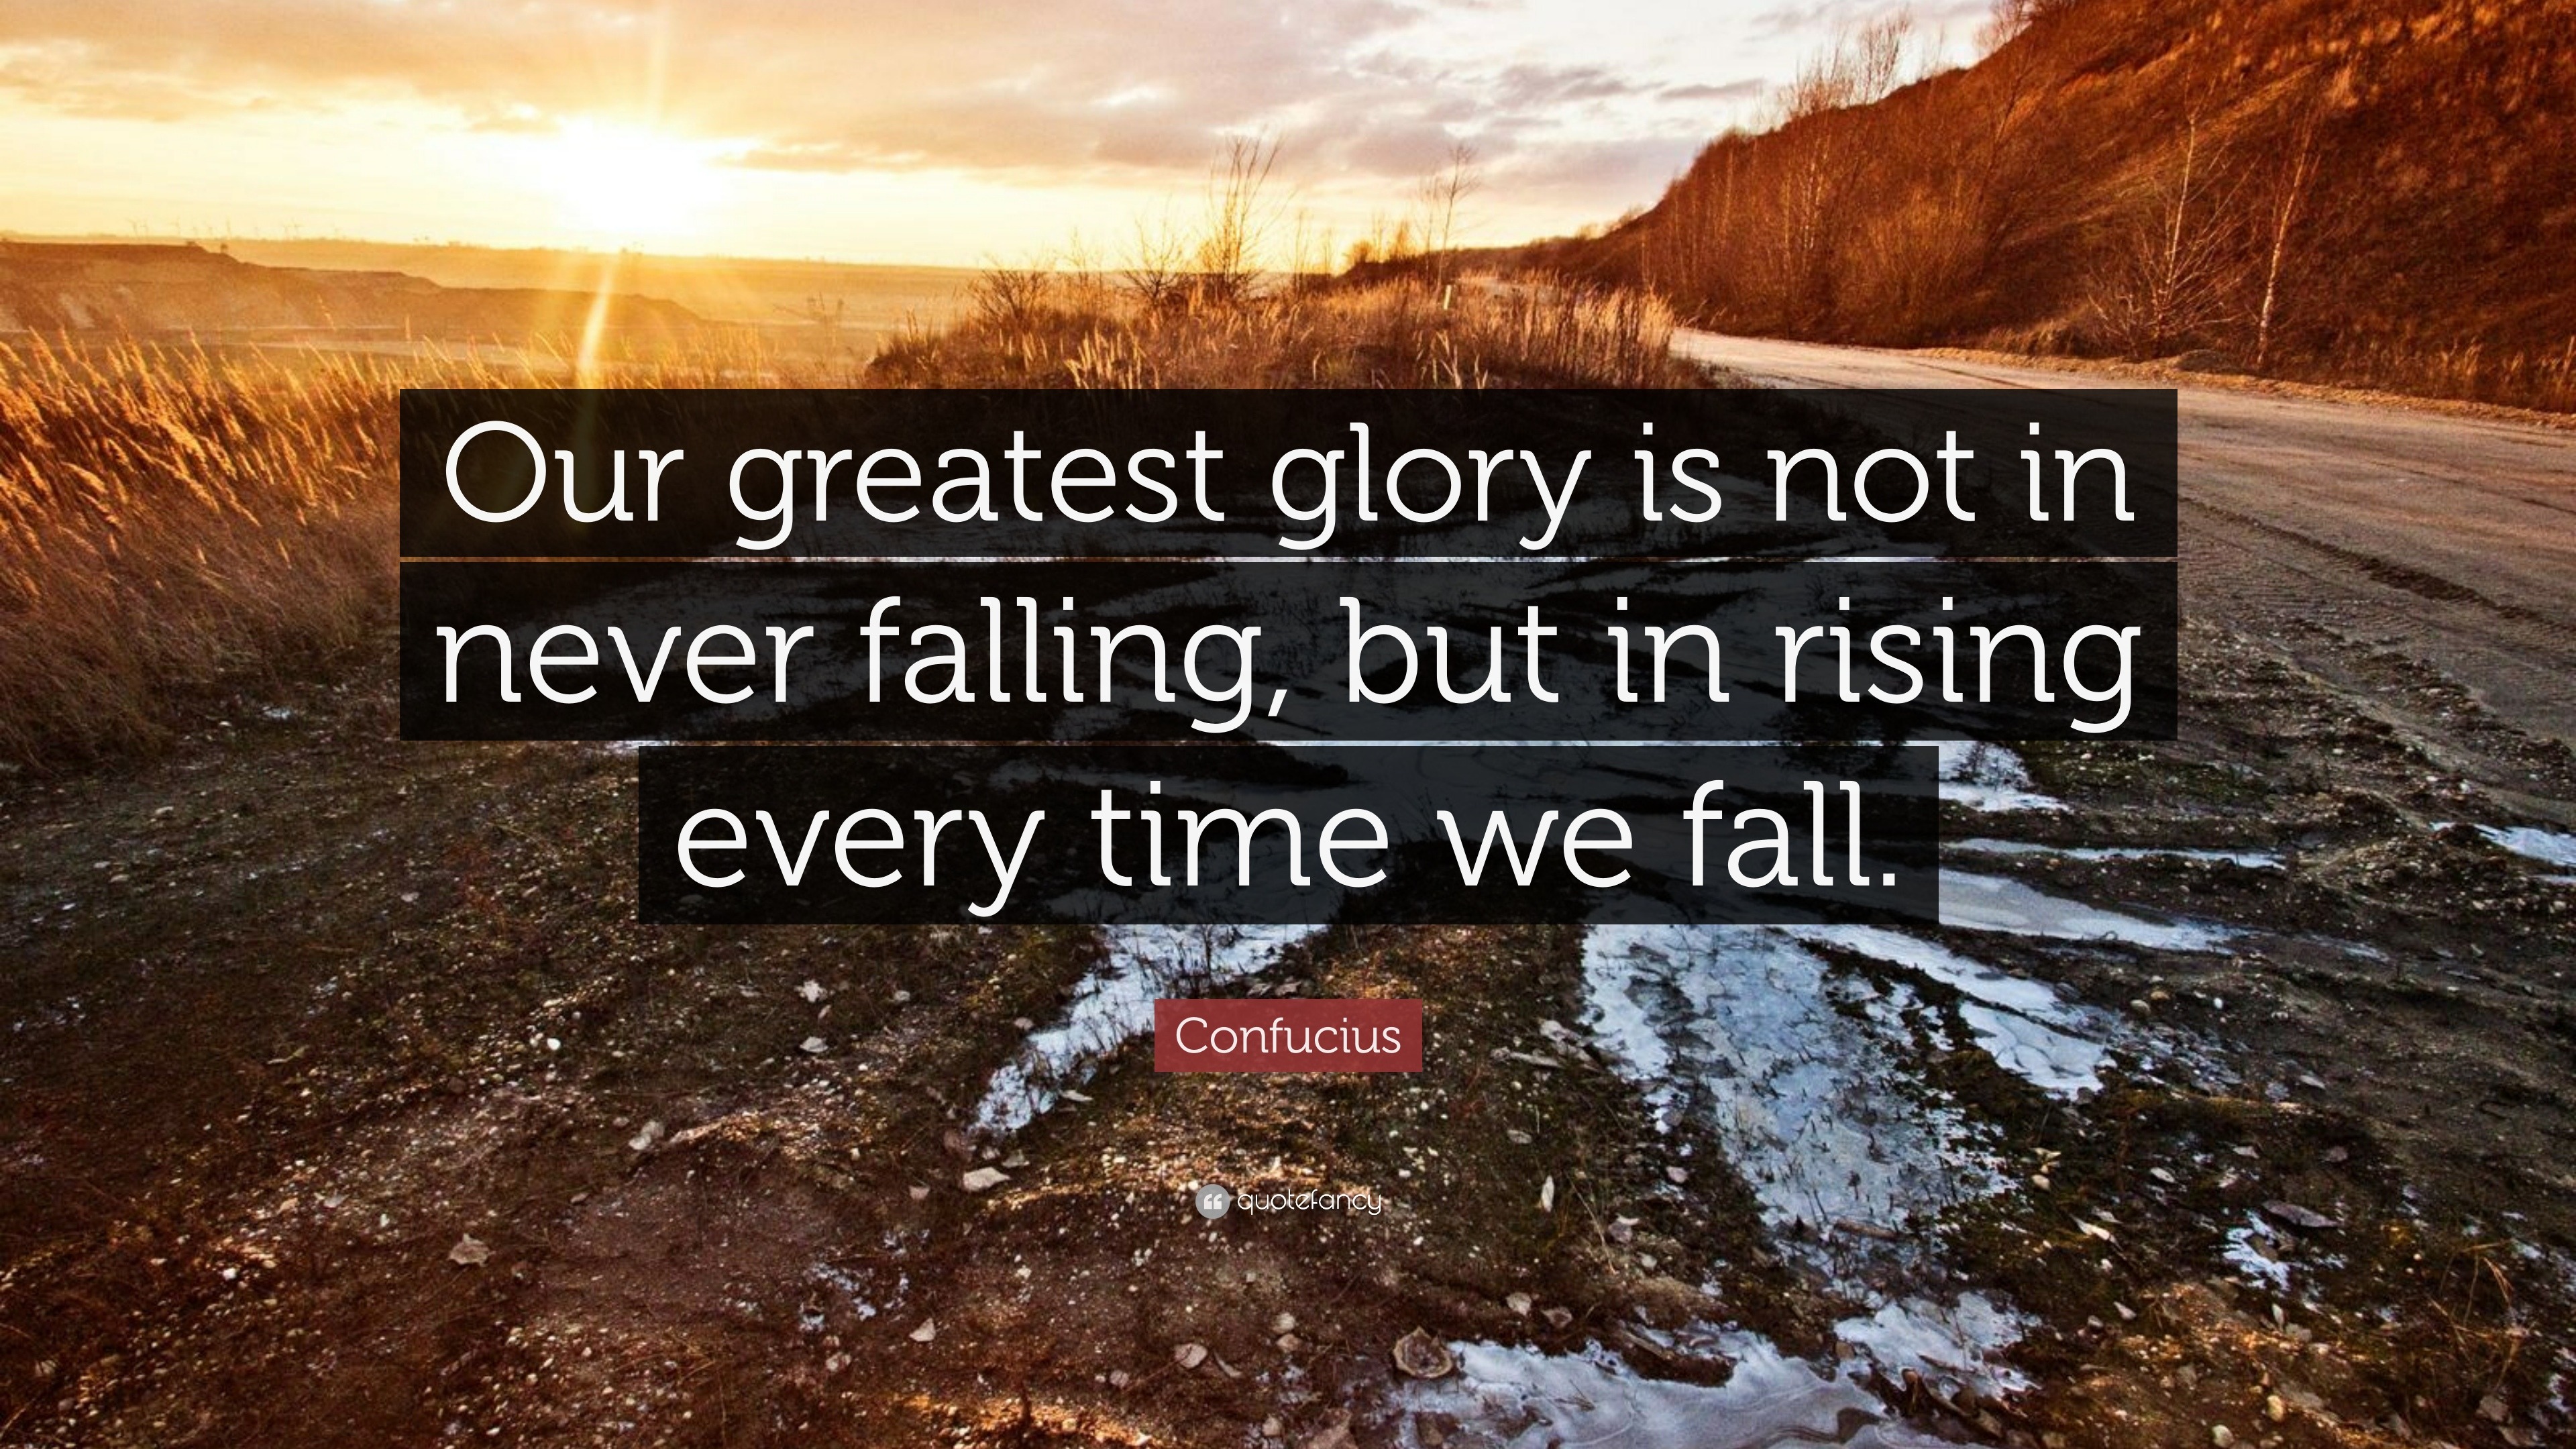 Confucius Quote: “Our greatest glory is not in never falling, but in